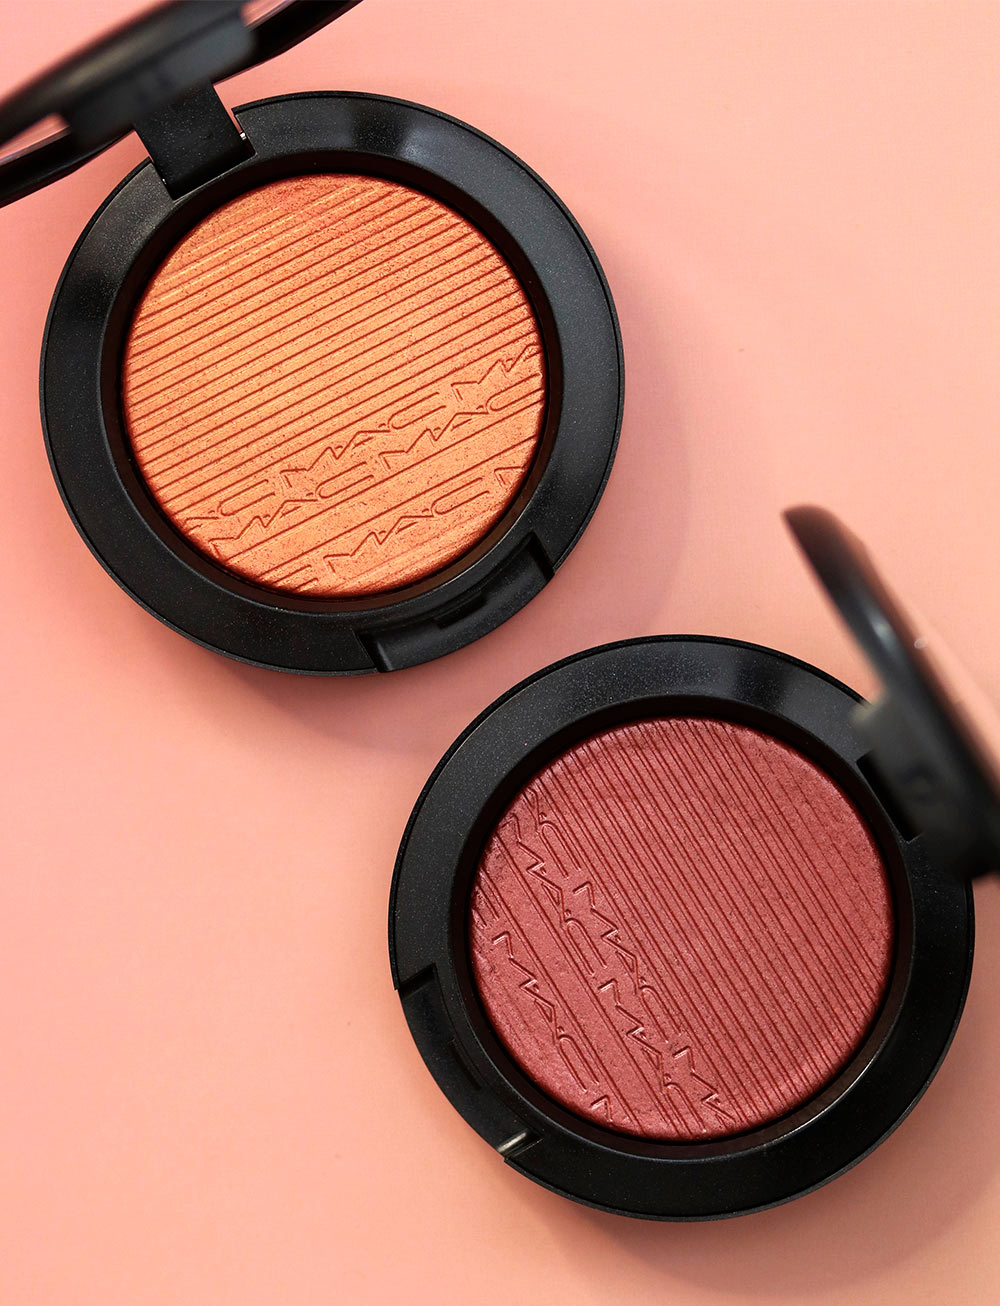 The New Mac Extra Dimension Blushes In Telling Glow And Faux Sure Makeup And Beauty Blog